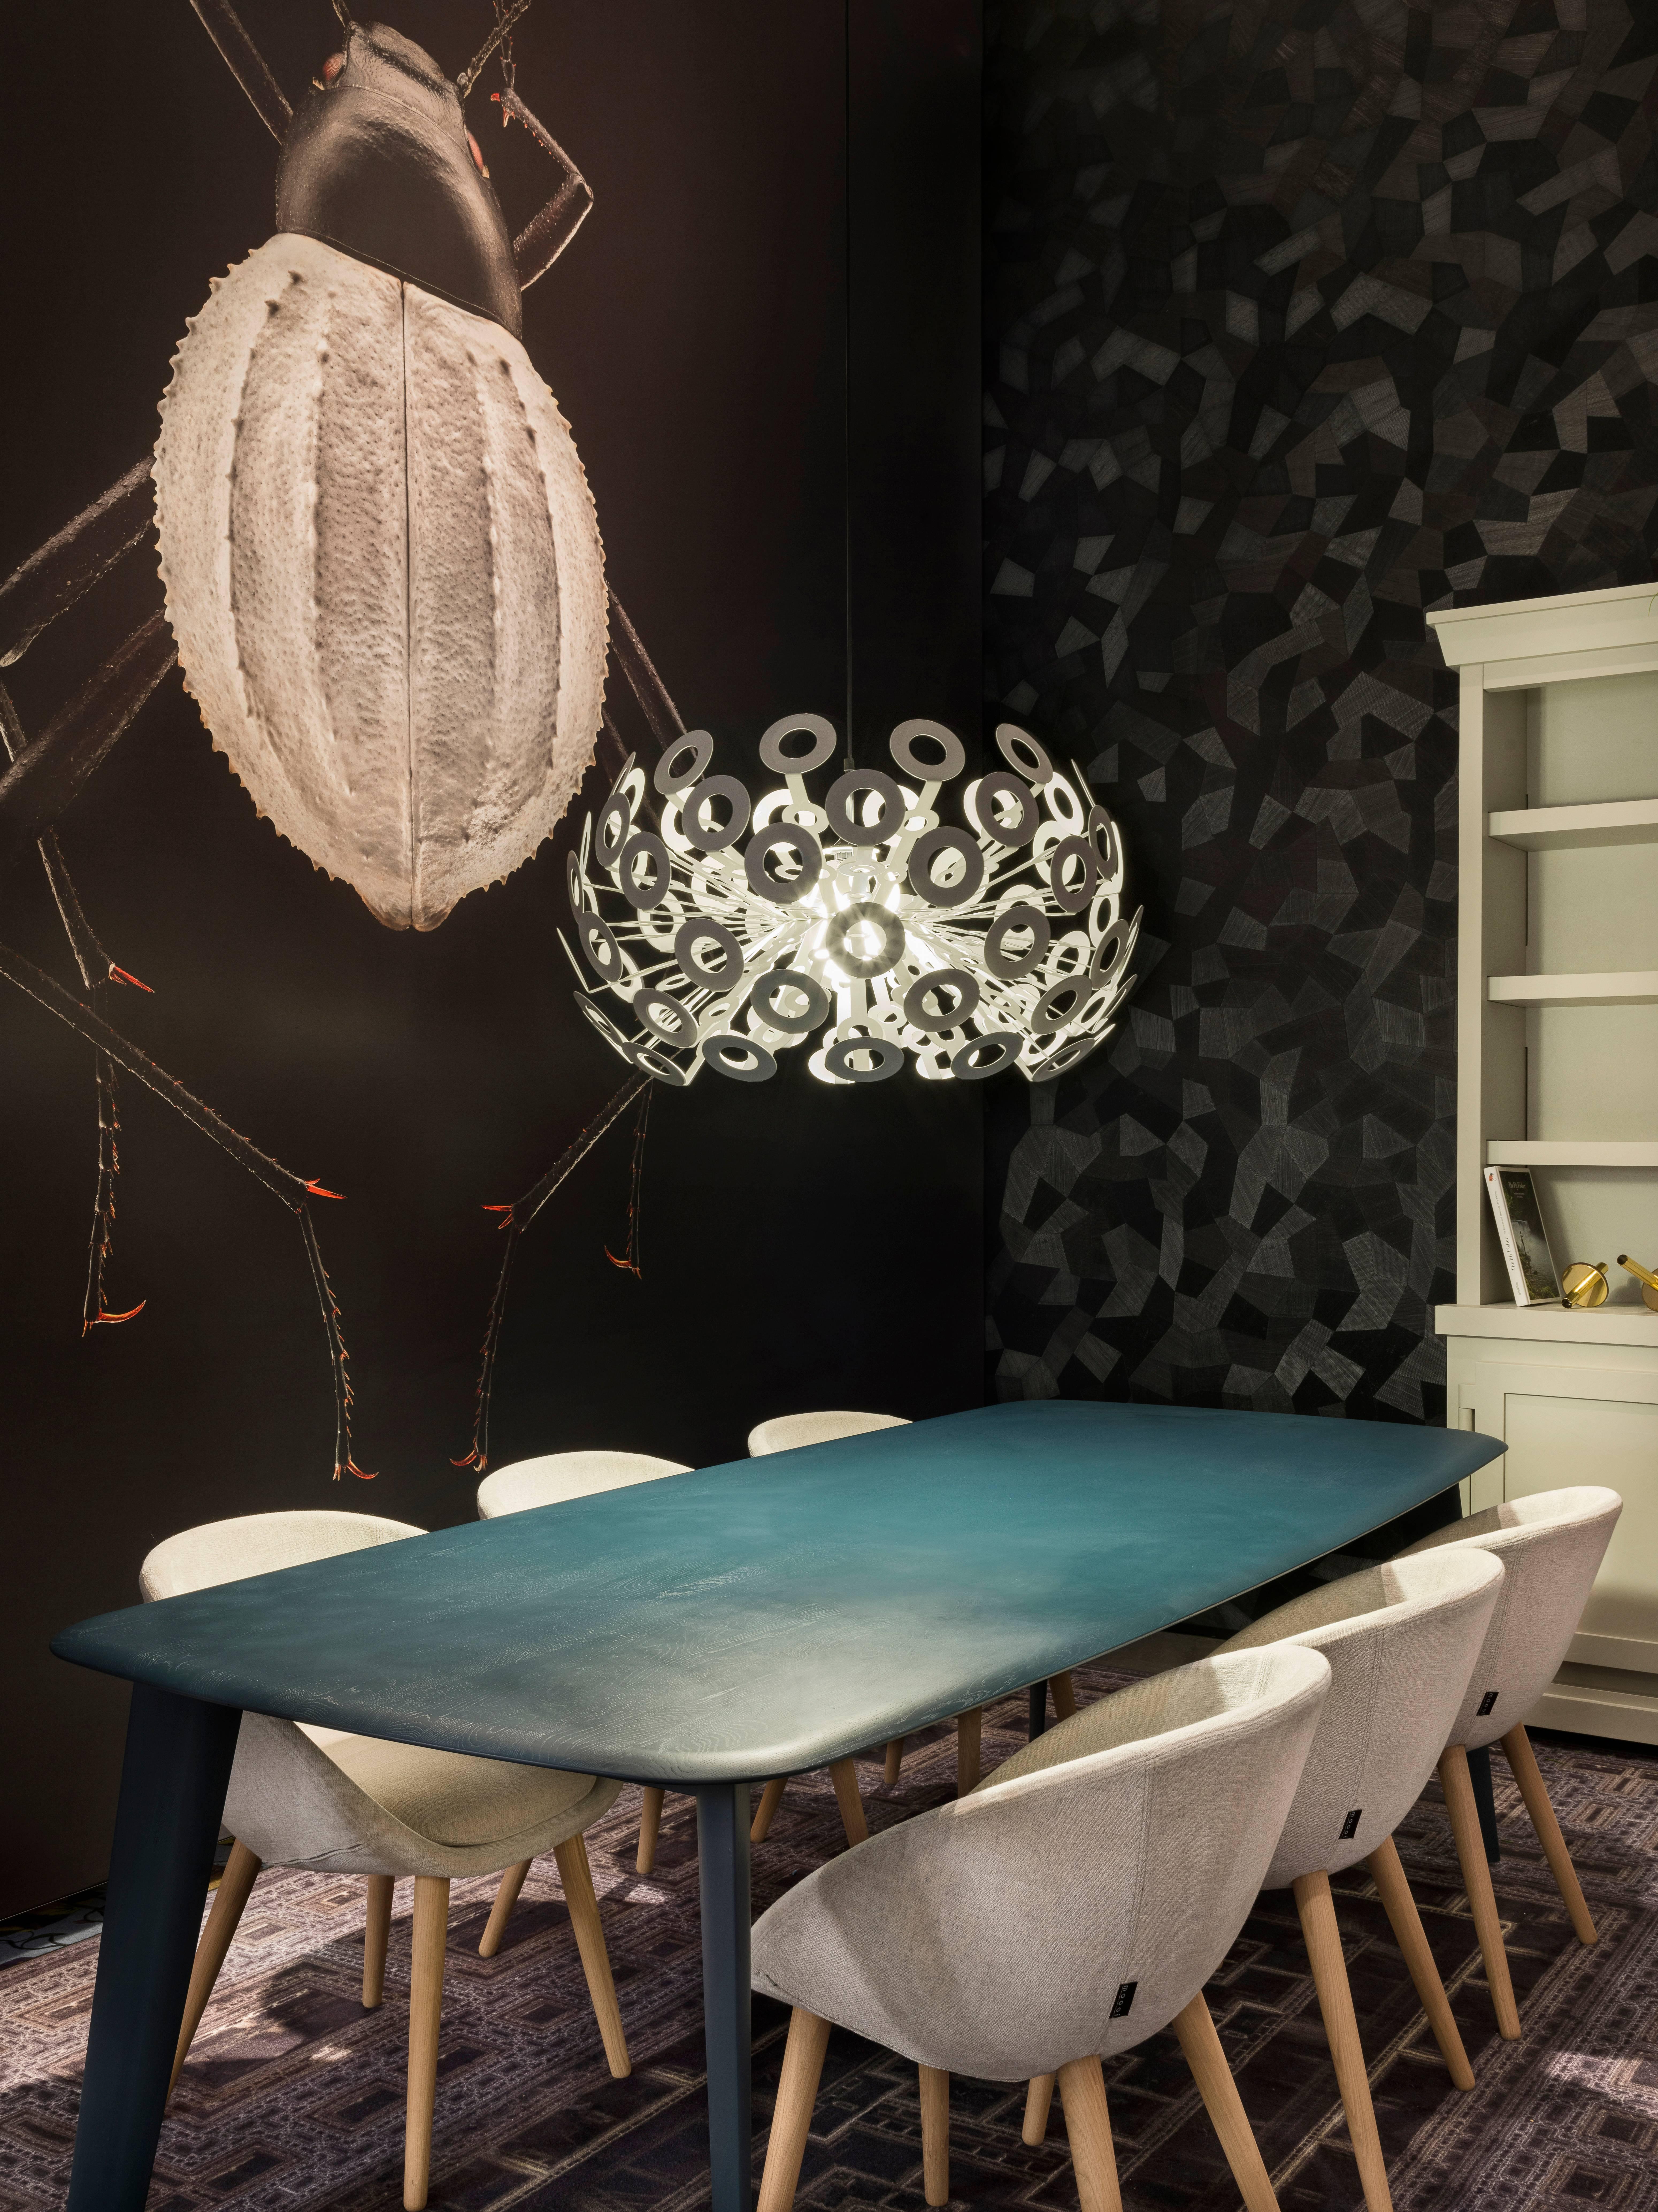 True to its name, Dandelion was initially inspired by the plant that creates the famous and poetic 'Dandelion snow' of fuzzy, cotton-like seeds when a gush of wind blows on it.
The lamp transmits an explosive feeling of energy in motion, reaching